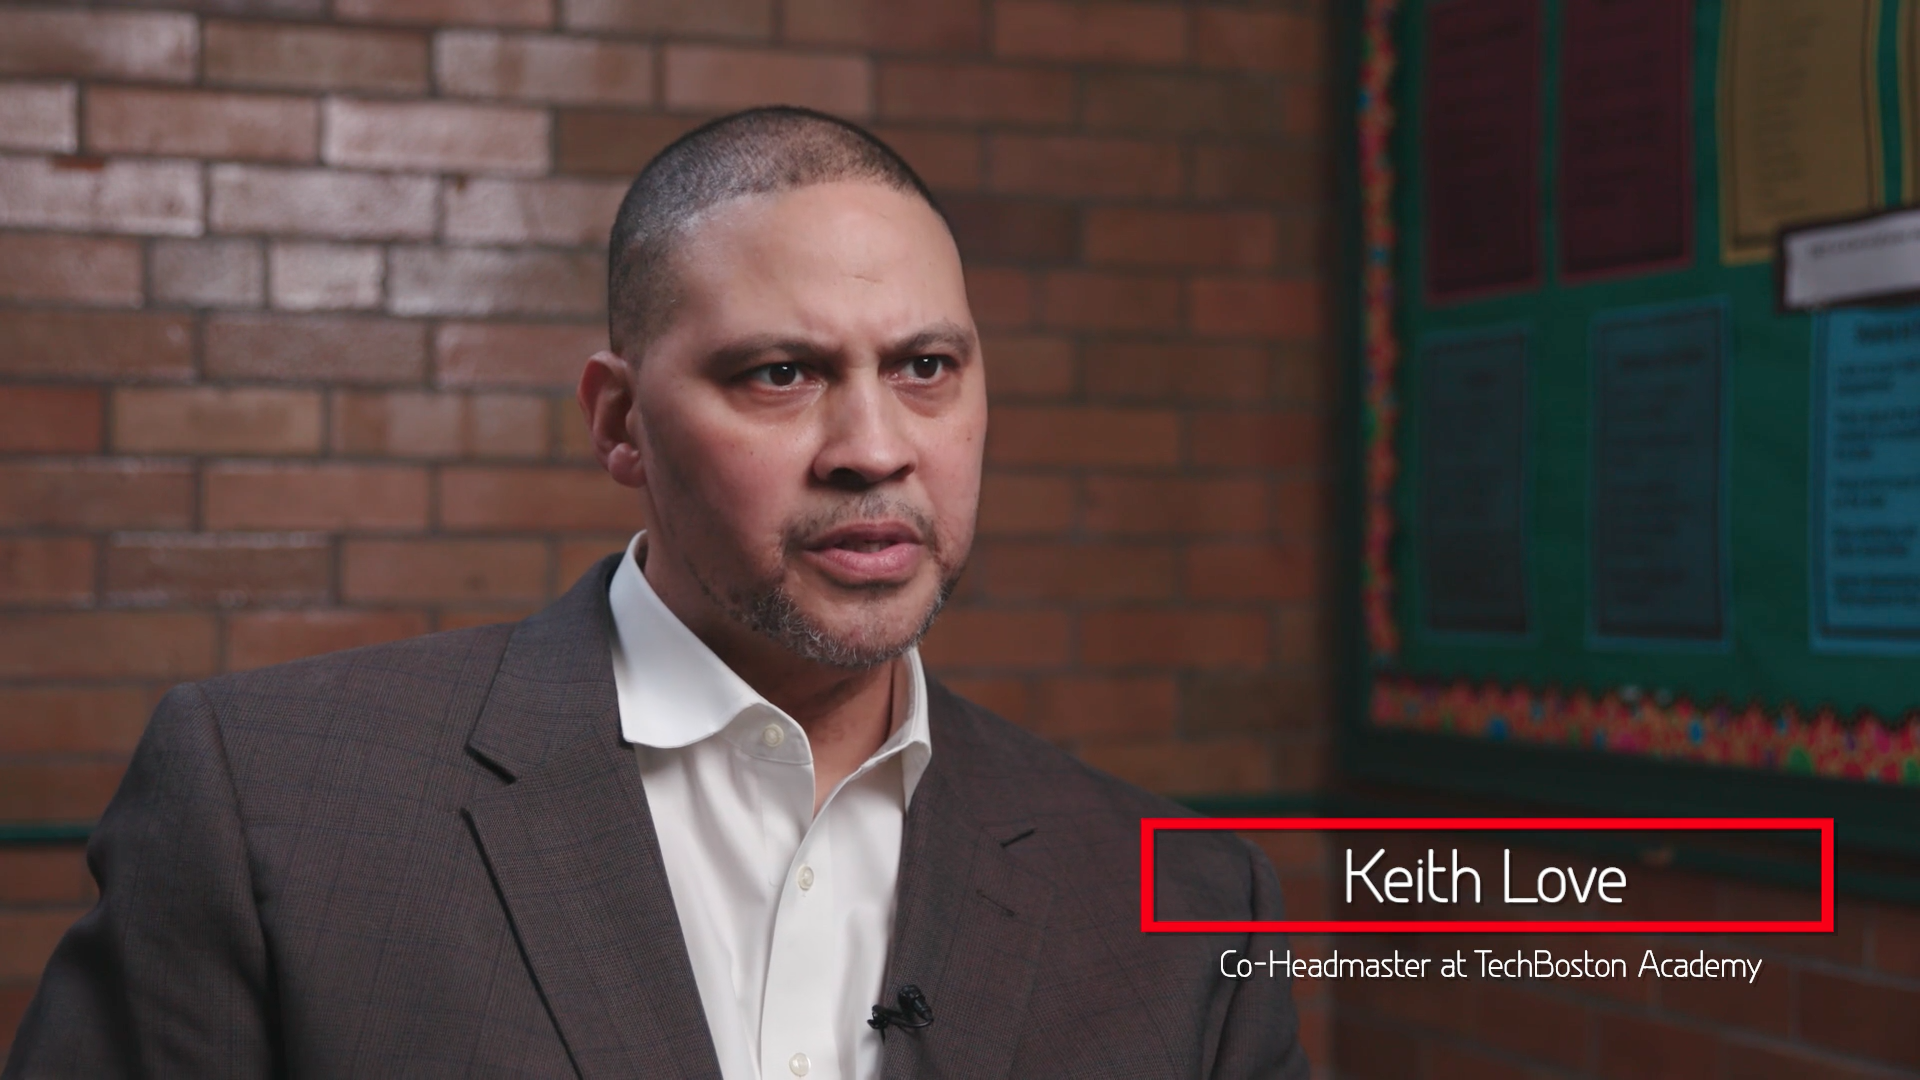 An on camera interview with Keith Love, the Co-Headmaster at TechBoston Academy